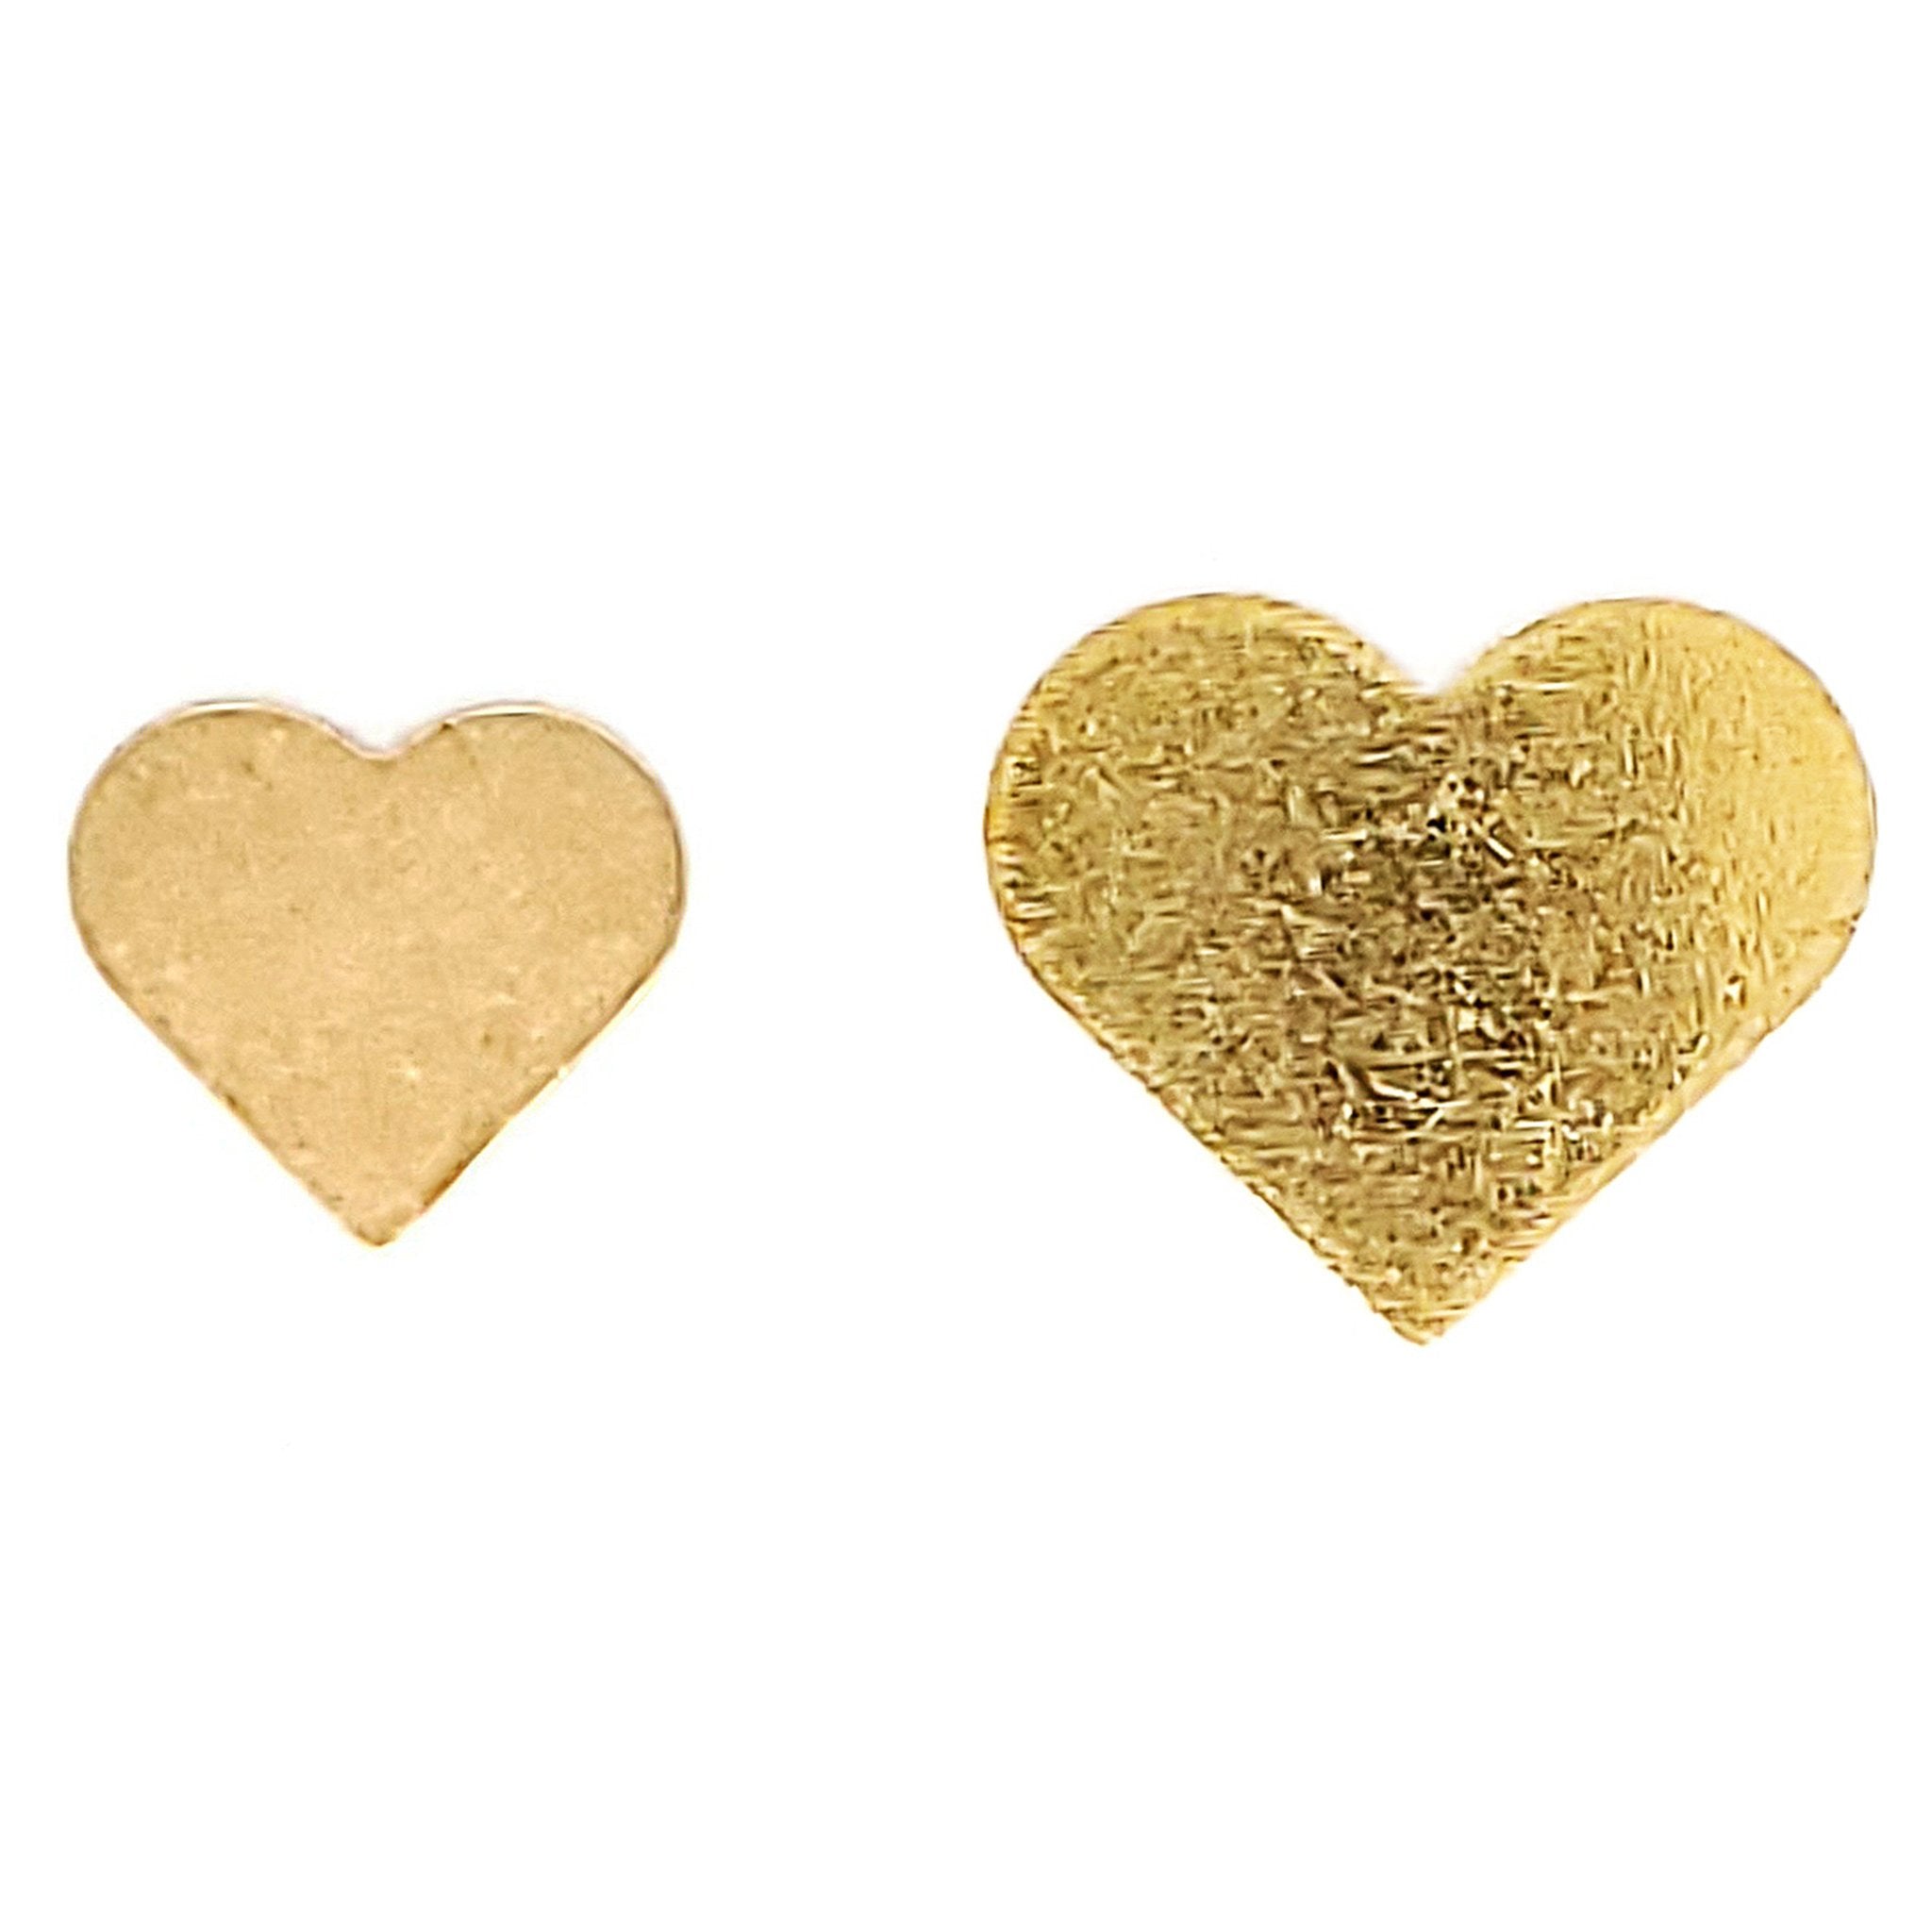 Brass blank heart pendant in two different sizes.